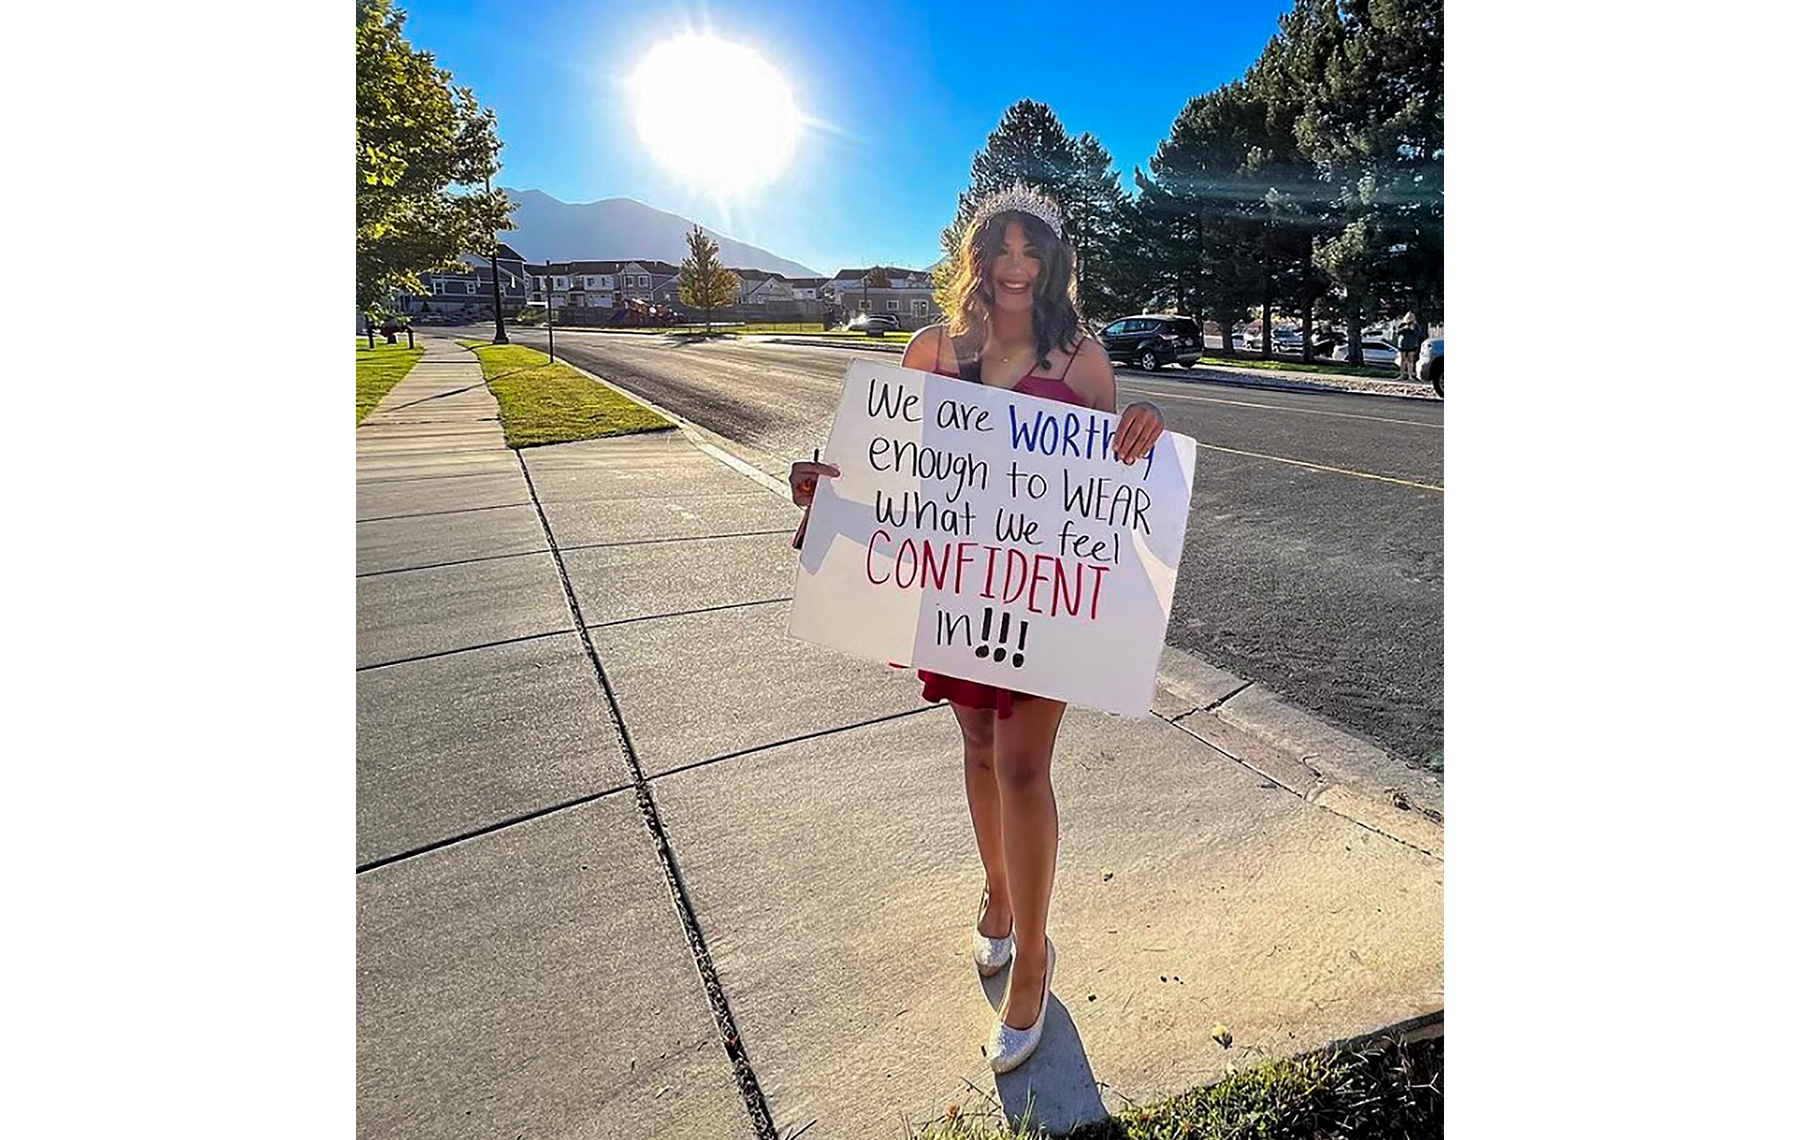 Two School Girls And Teacher - Utah teacher accuses students of forming a 'mob' when they protested  homecoming dress code